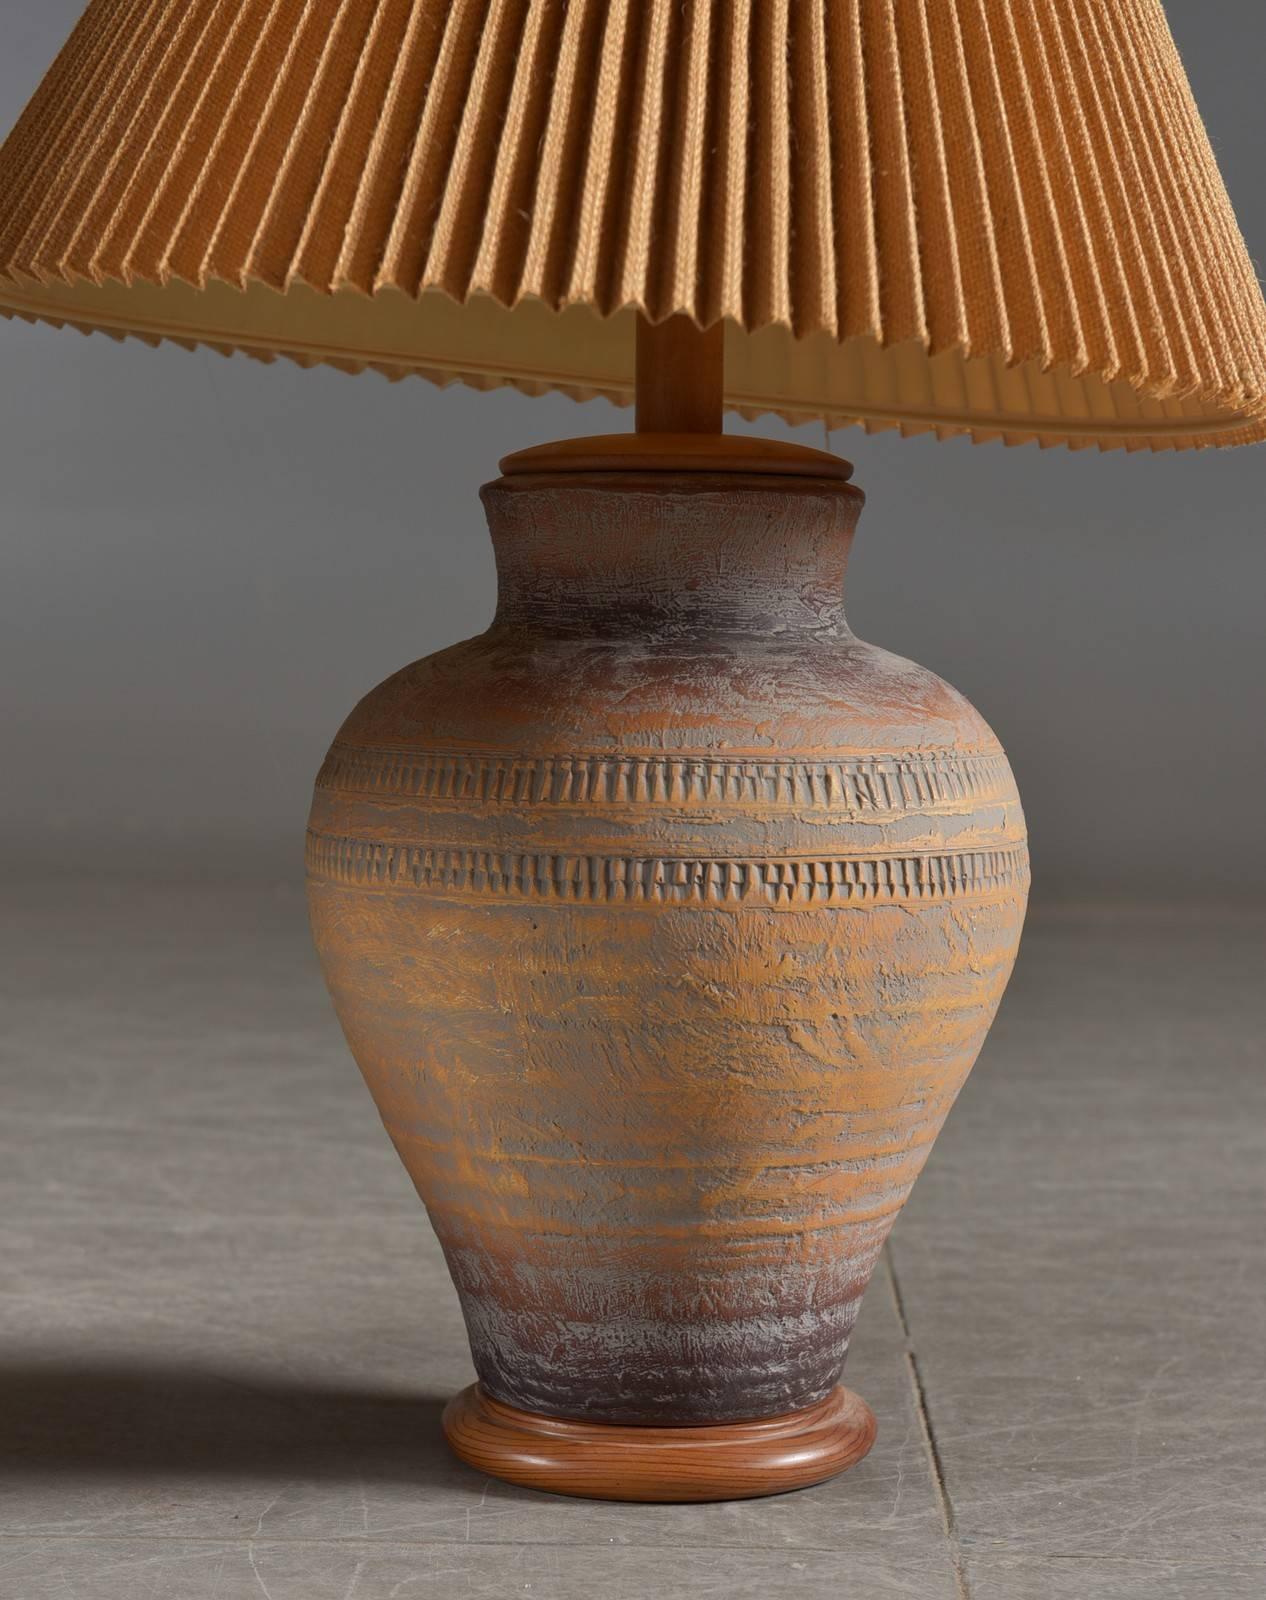 Pair of Danish modern pottery lamps with incised decoration and mounted on wooden bases.